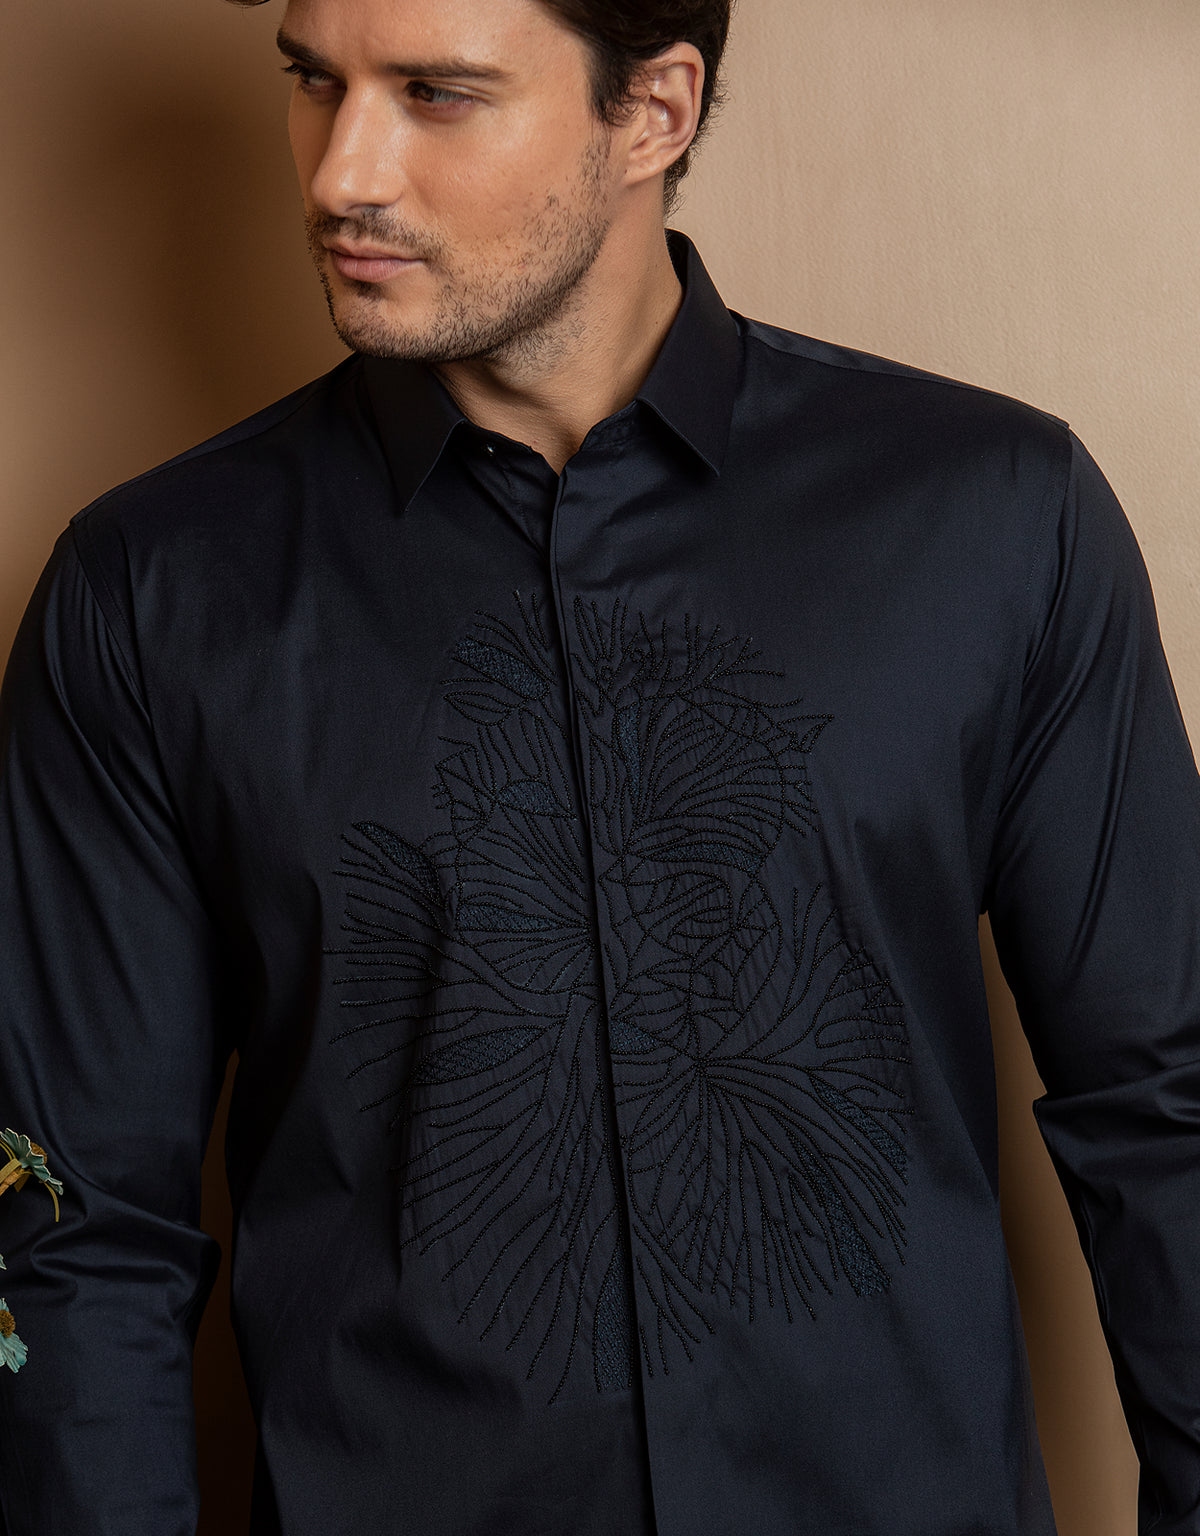 ABSTRACT PEARL FLORAL EMBROIDERED SHIRT